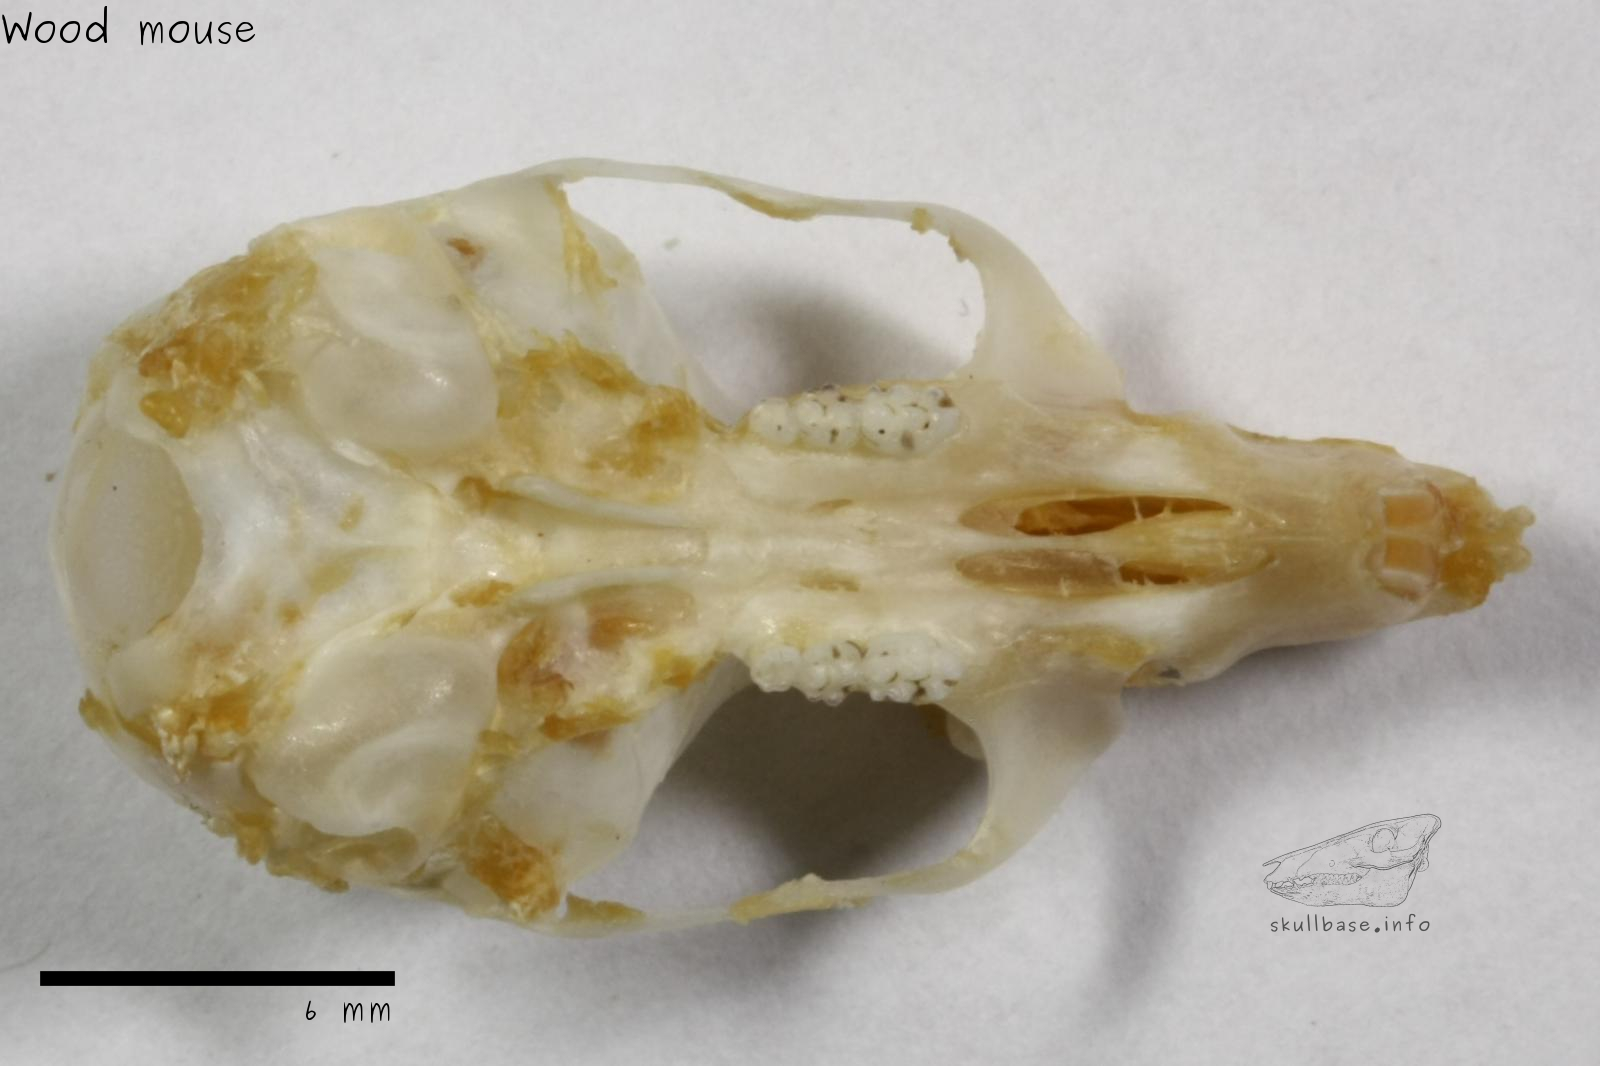 Wood mouse (Apodemus sylvaticus) skull ventral view